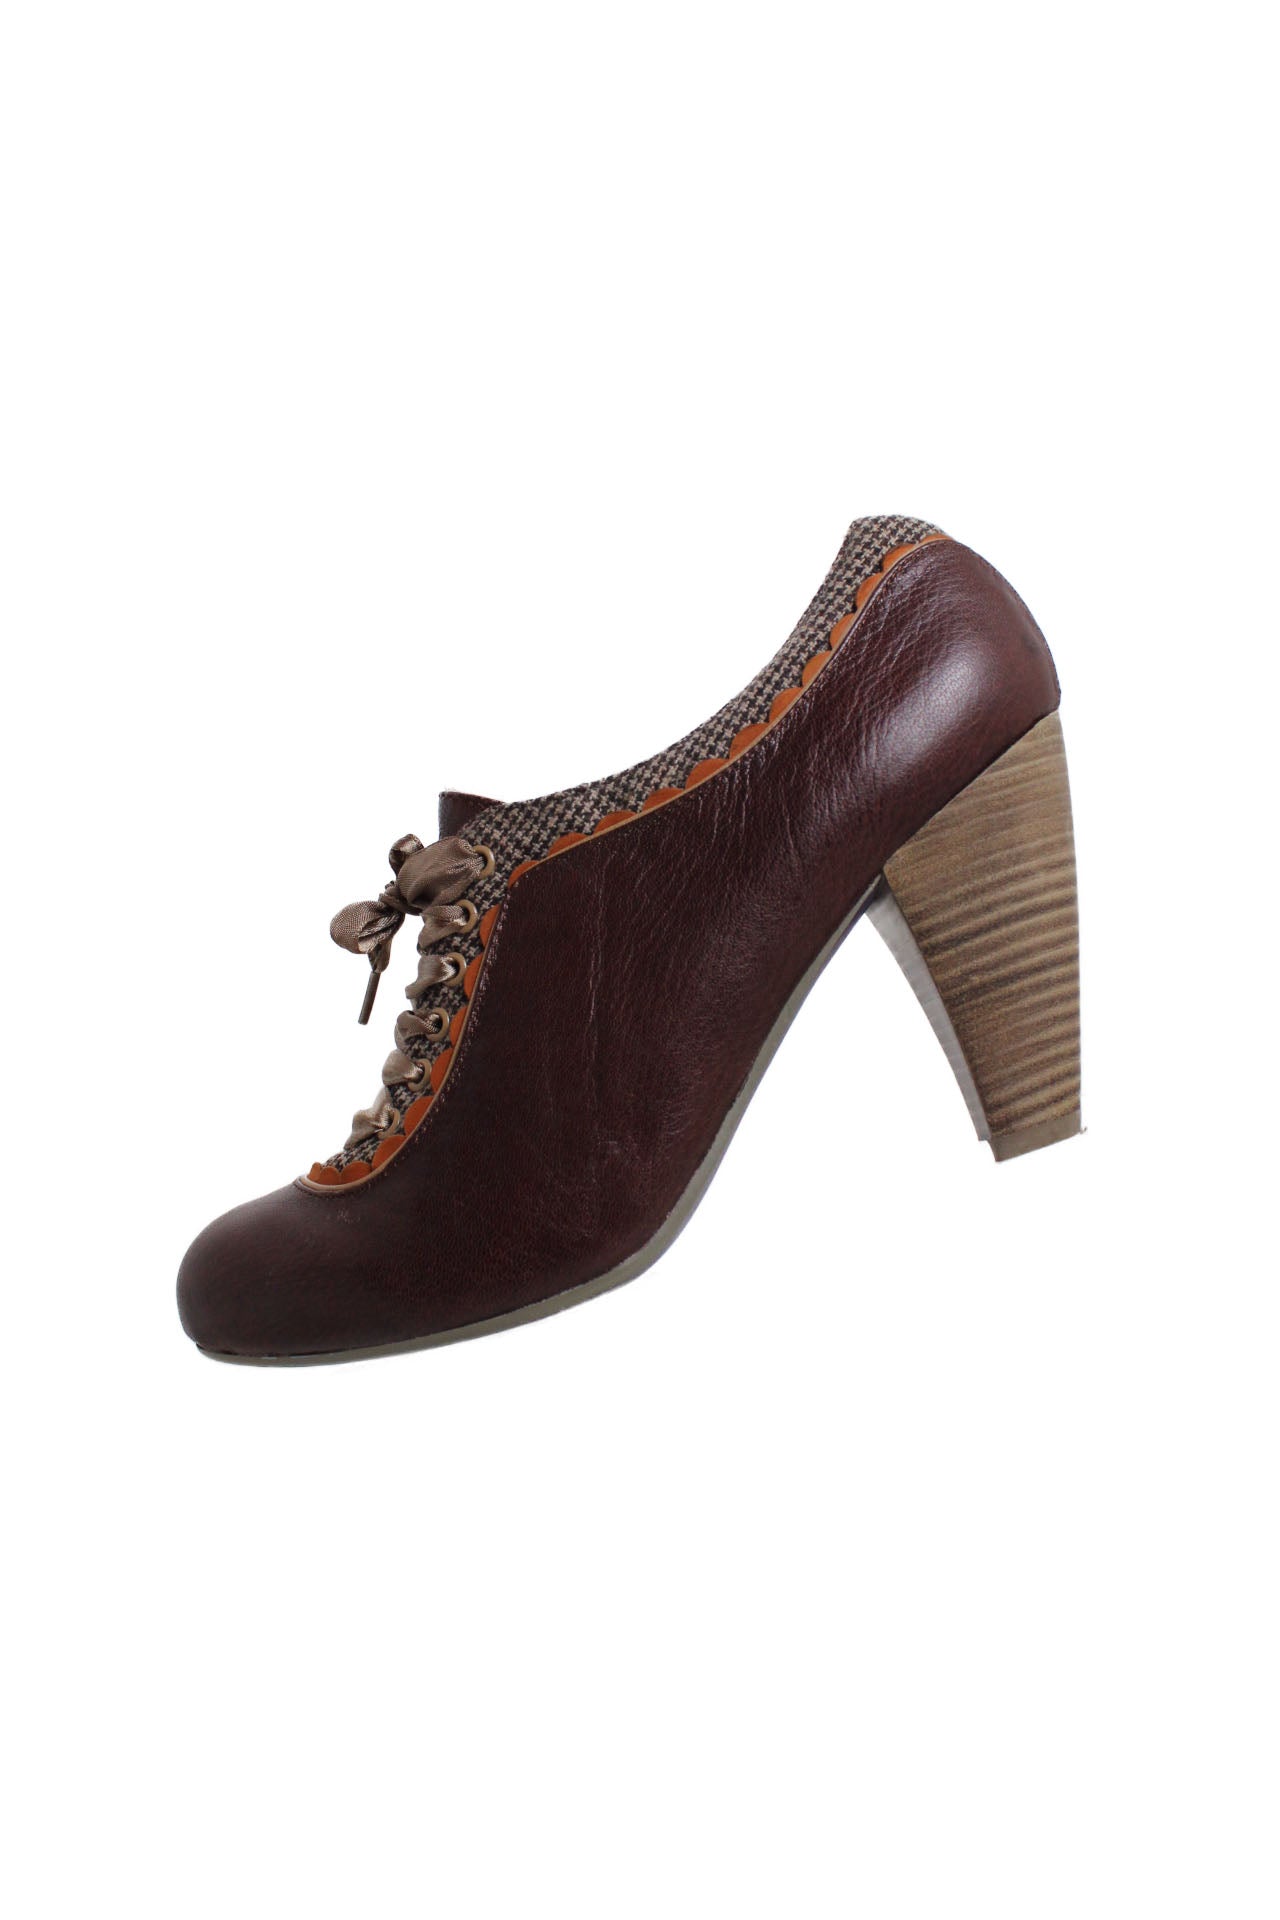 description: vintage poetic license brown toe-cap oxford heels. features rounded toe silhouette, lace up closure, and houndstooth design at front. 